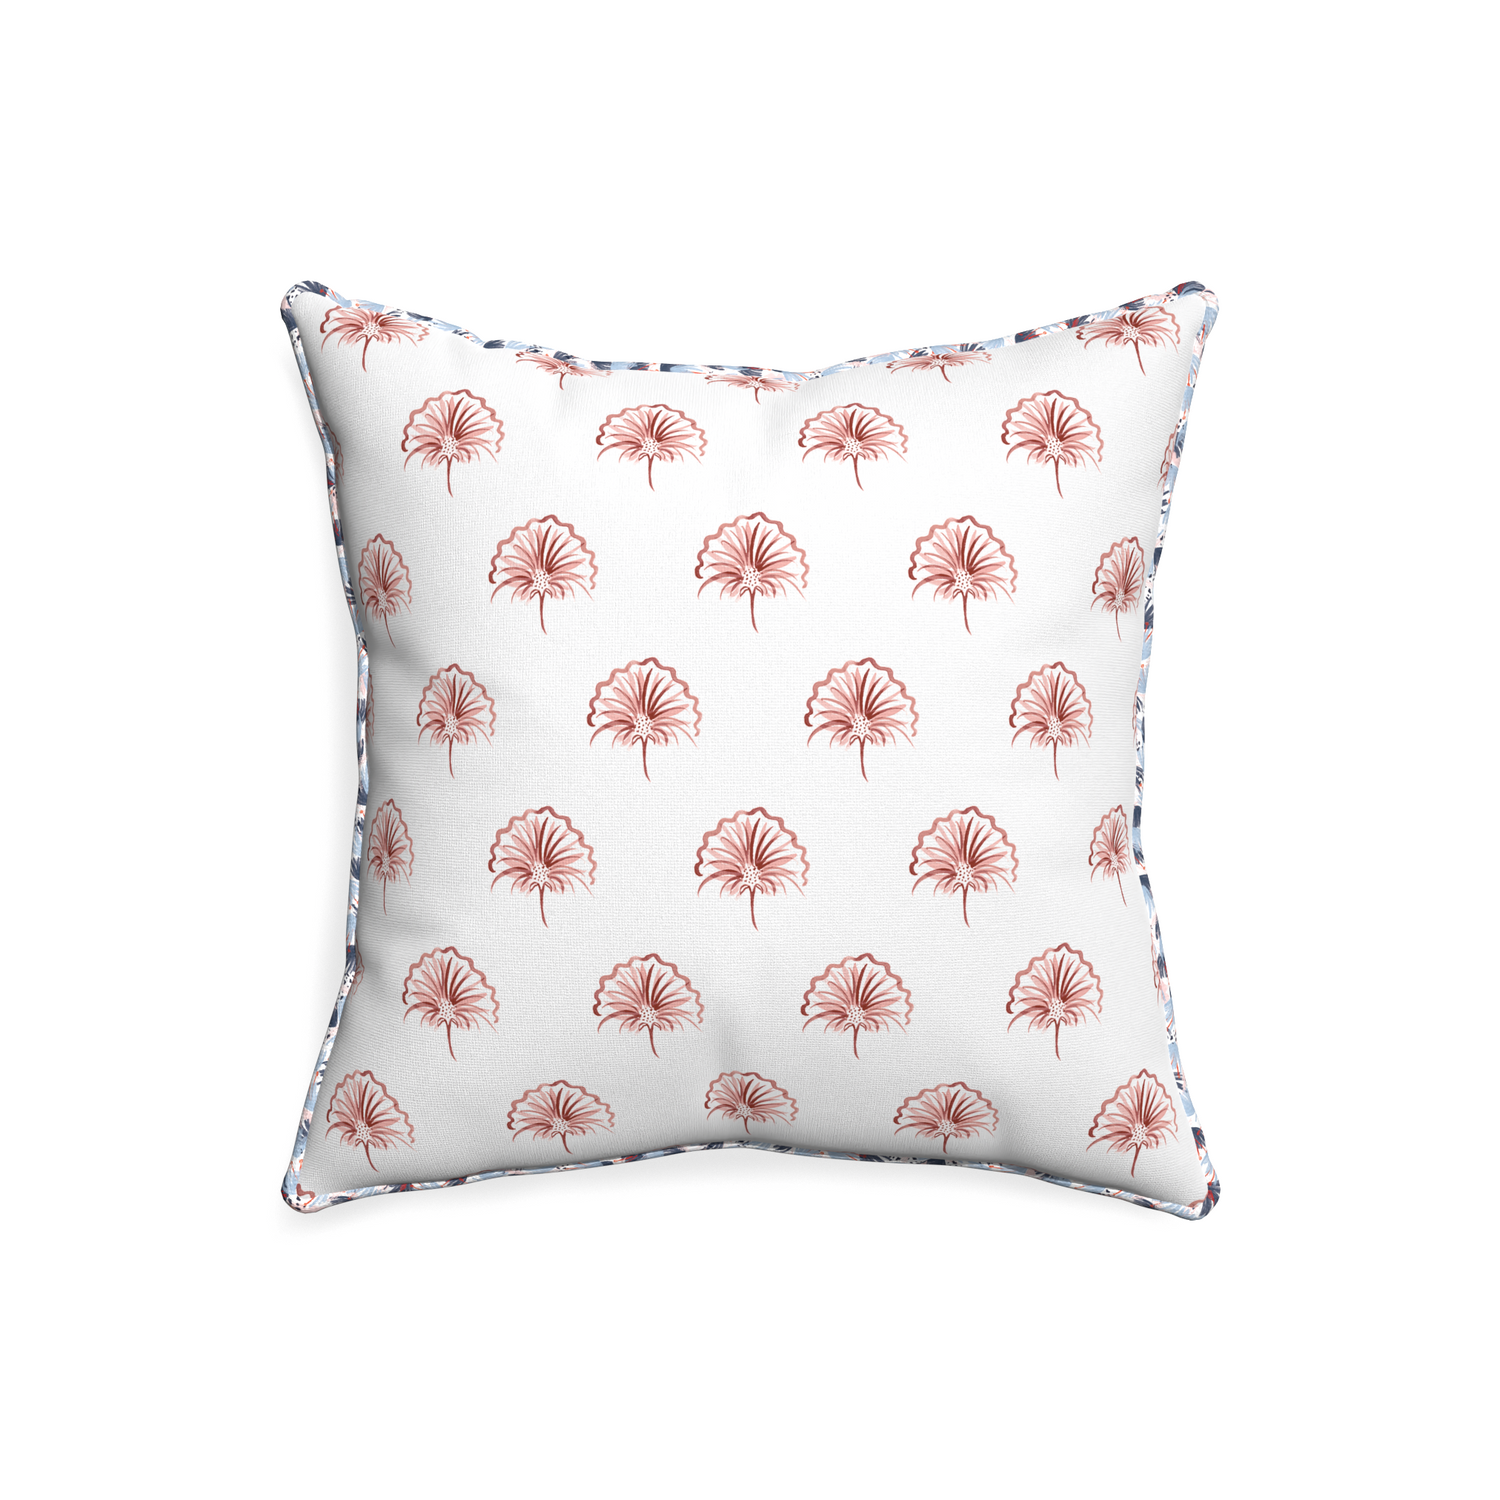 20-square penelope rose custom floral pinkpillow with e piping on white background